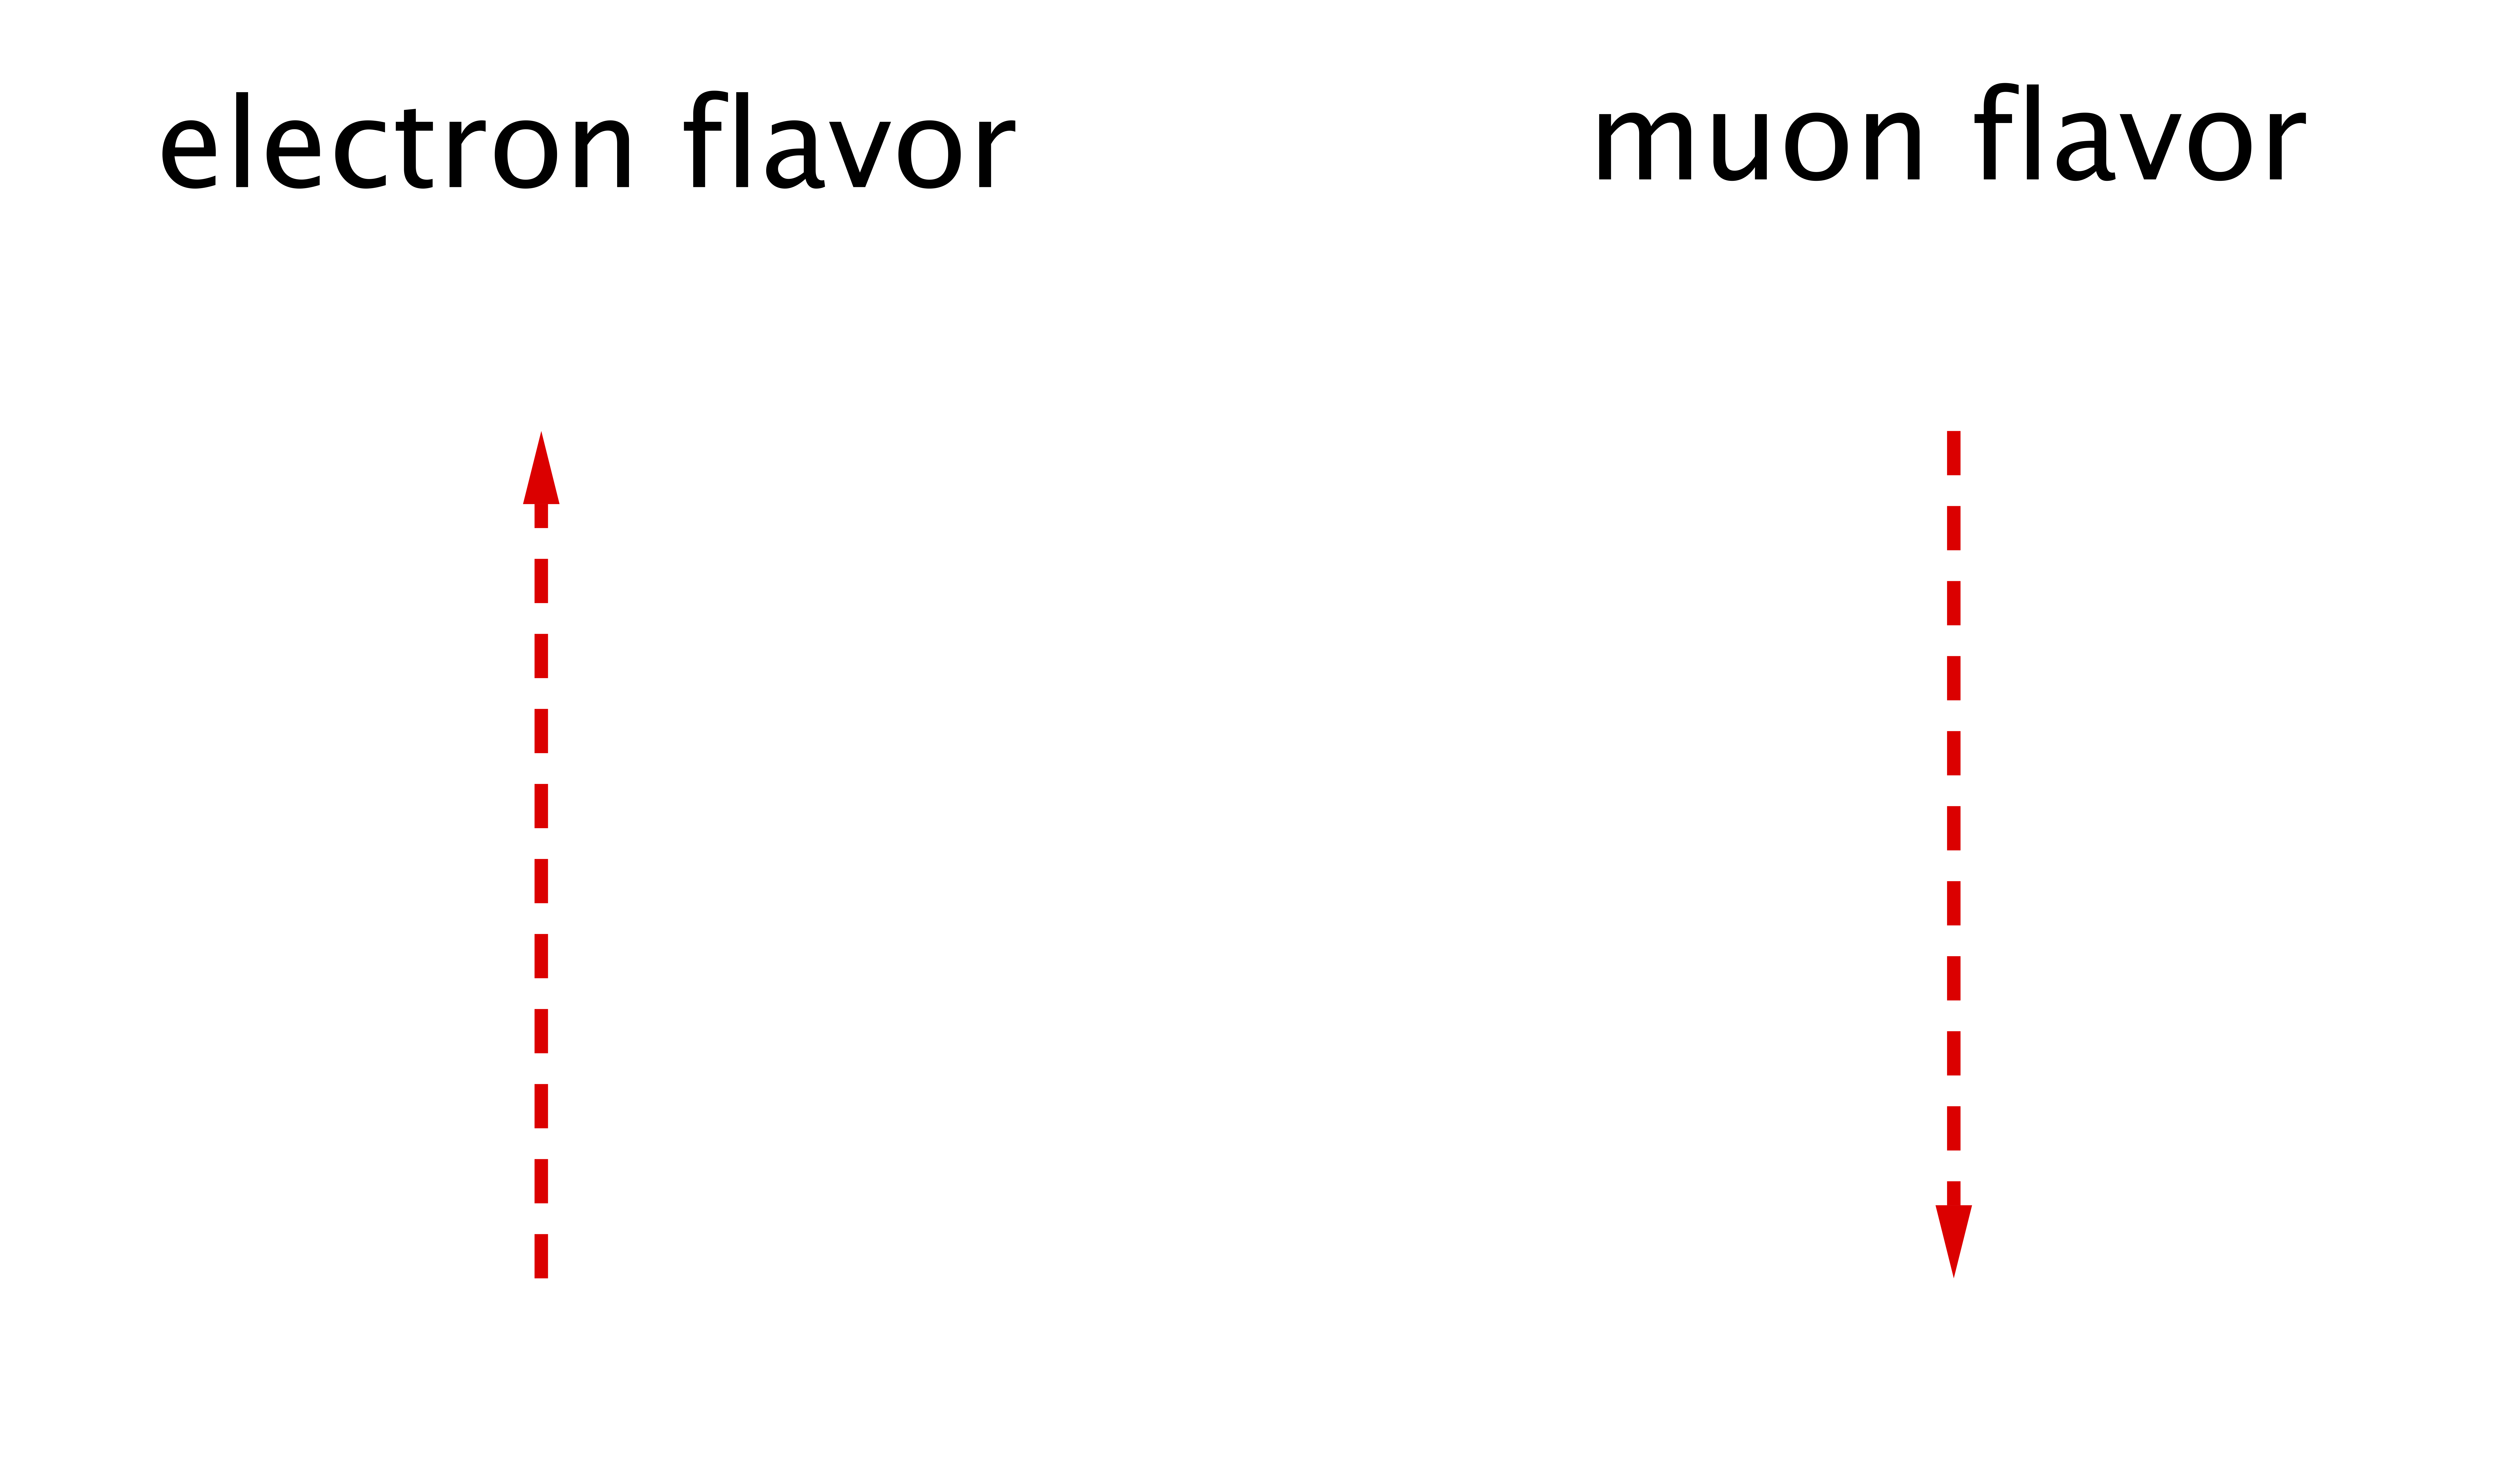 In the flavor isospin picture, a flavor isospin pointing upward, i.e., along the third axis in flavor space, indicates that the neutrino is in the electron flavor, while the downward direction indicates the other flavor, such as the muon flavor.